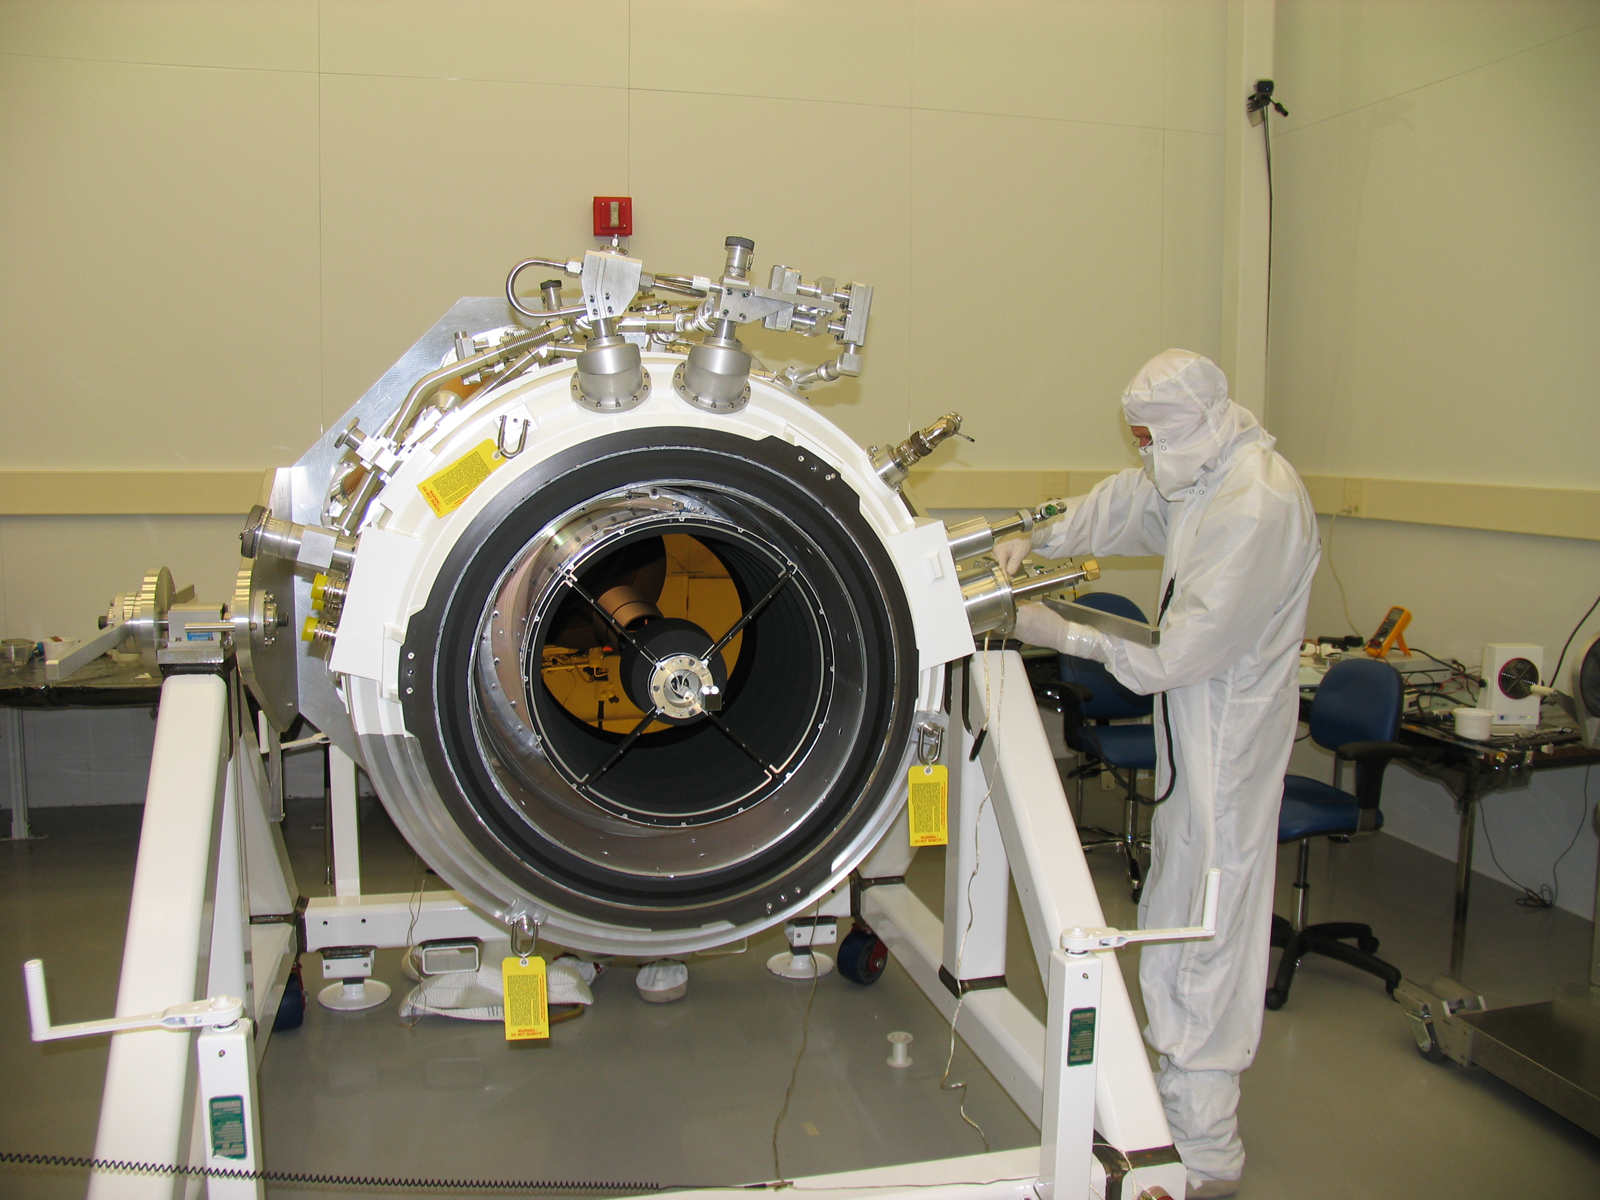 The cryostat with the optics installed within. Primary mirror (coated with gold) is visible.